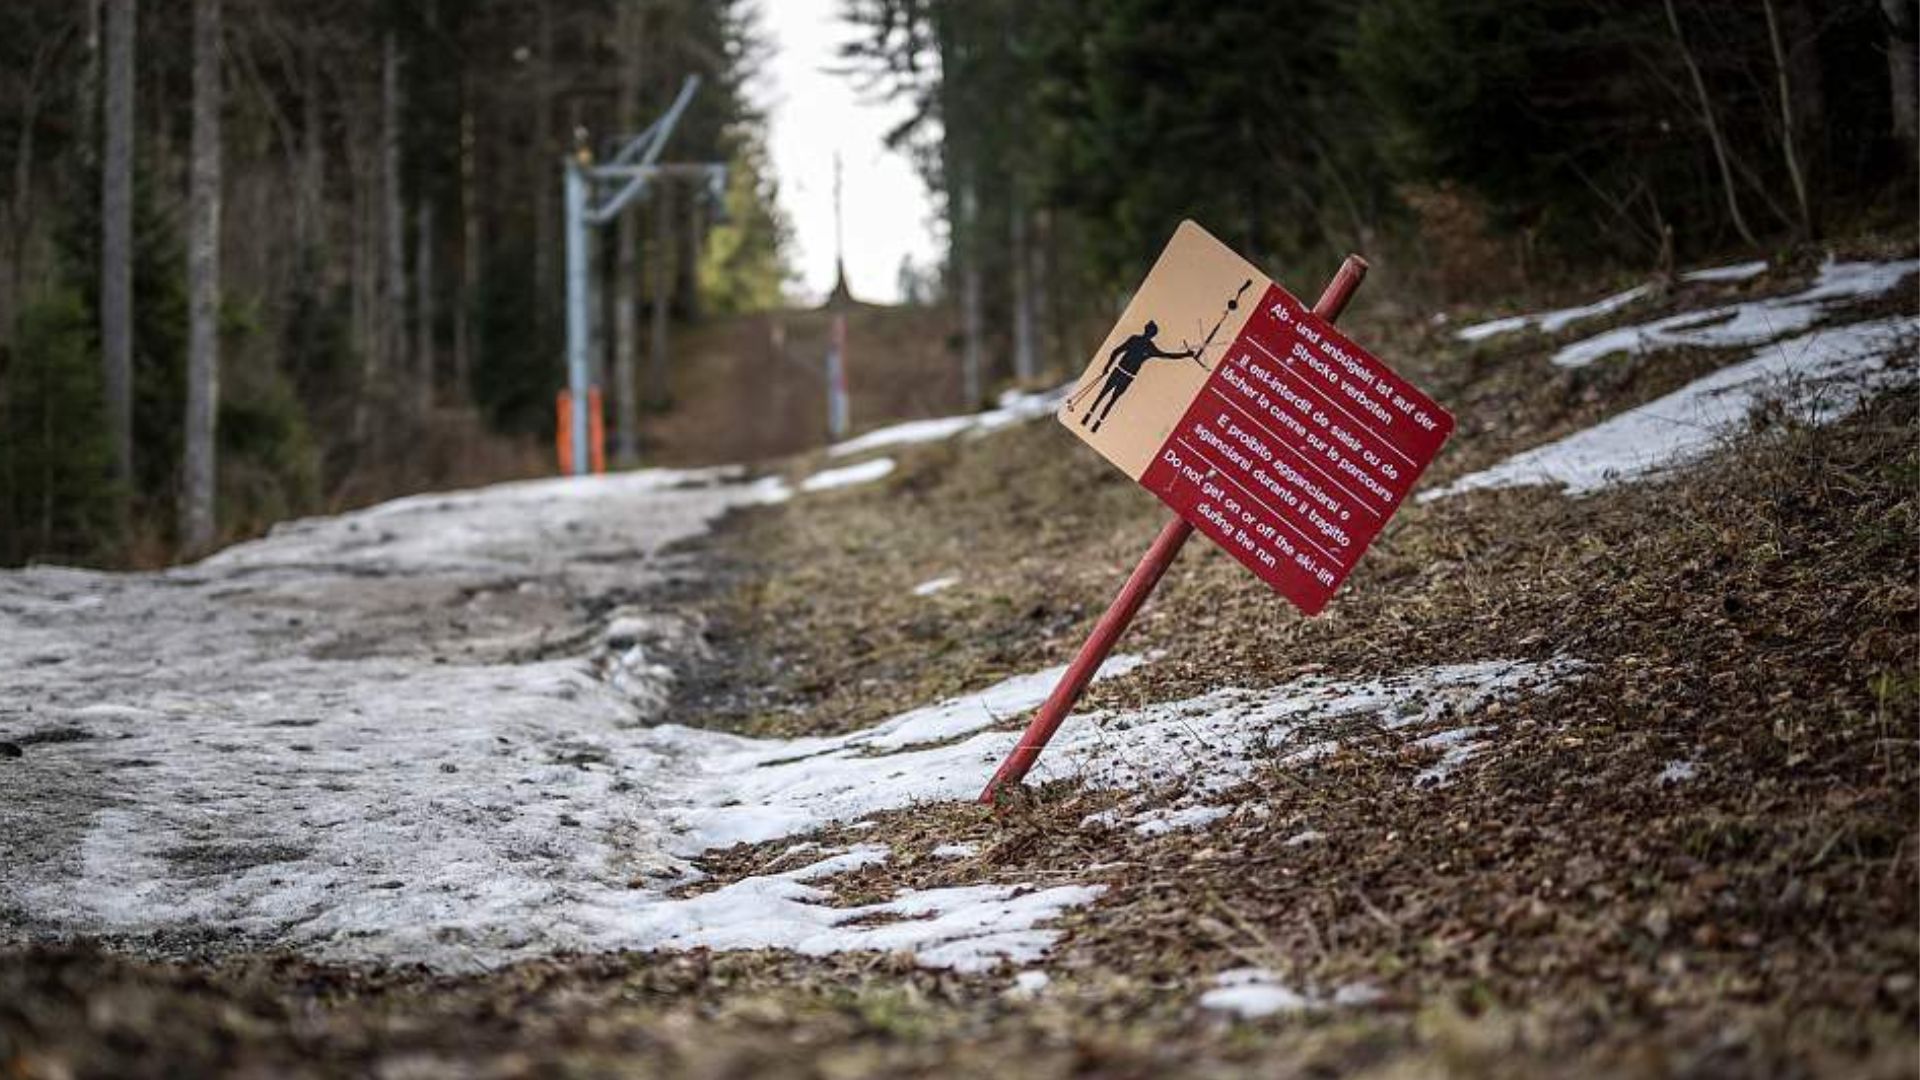 The Swiss resort of Les Paccots also had to close its slopes due to a lack of snow this winter/ Fabrice Coffrini/CFP